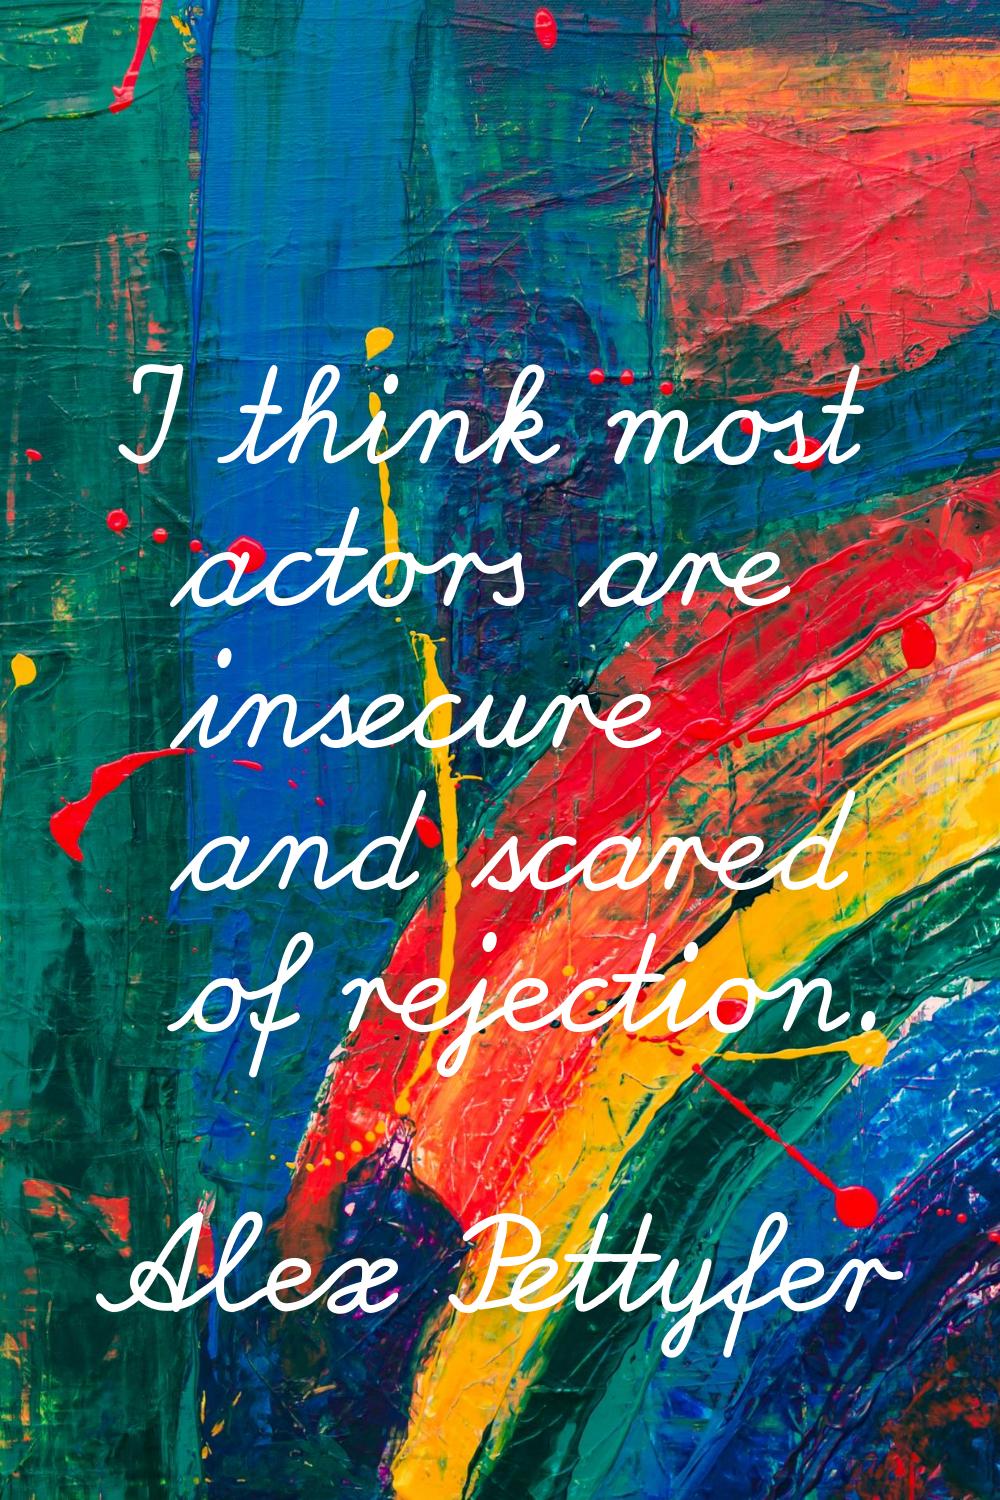 I think most actors are insecure and scared of rejection.